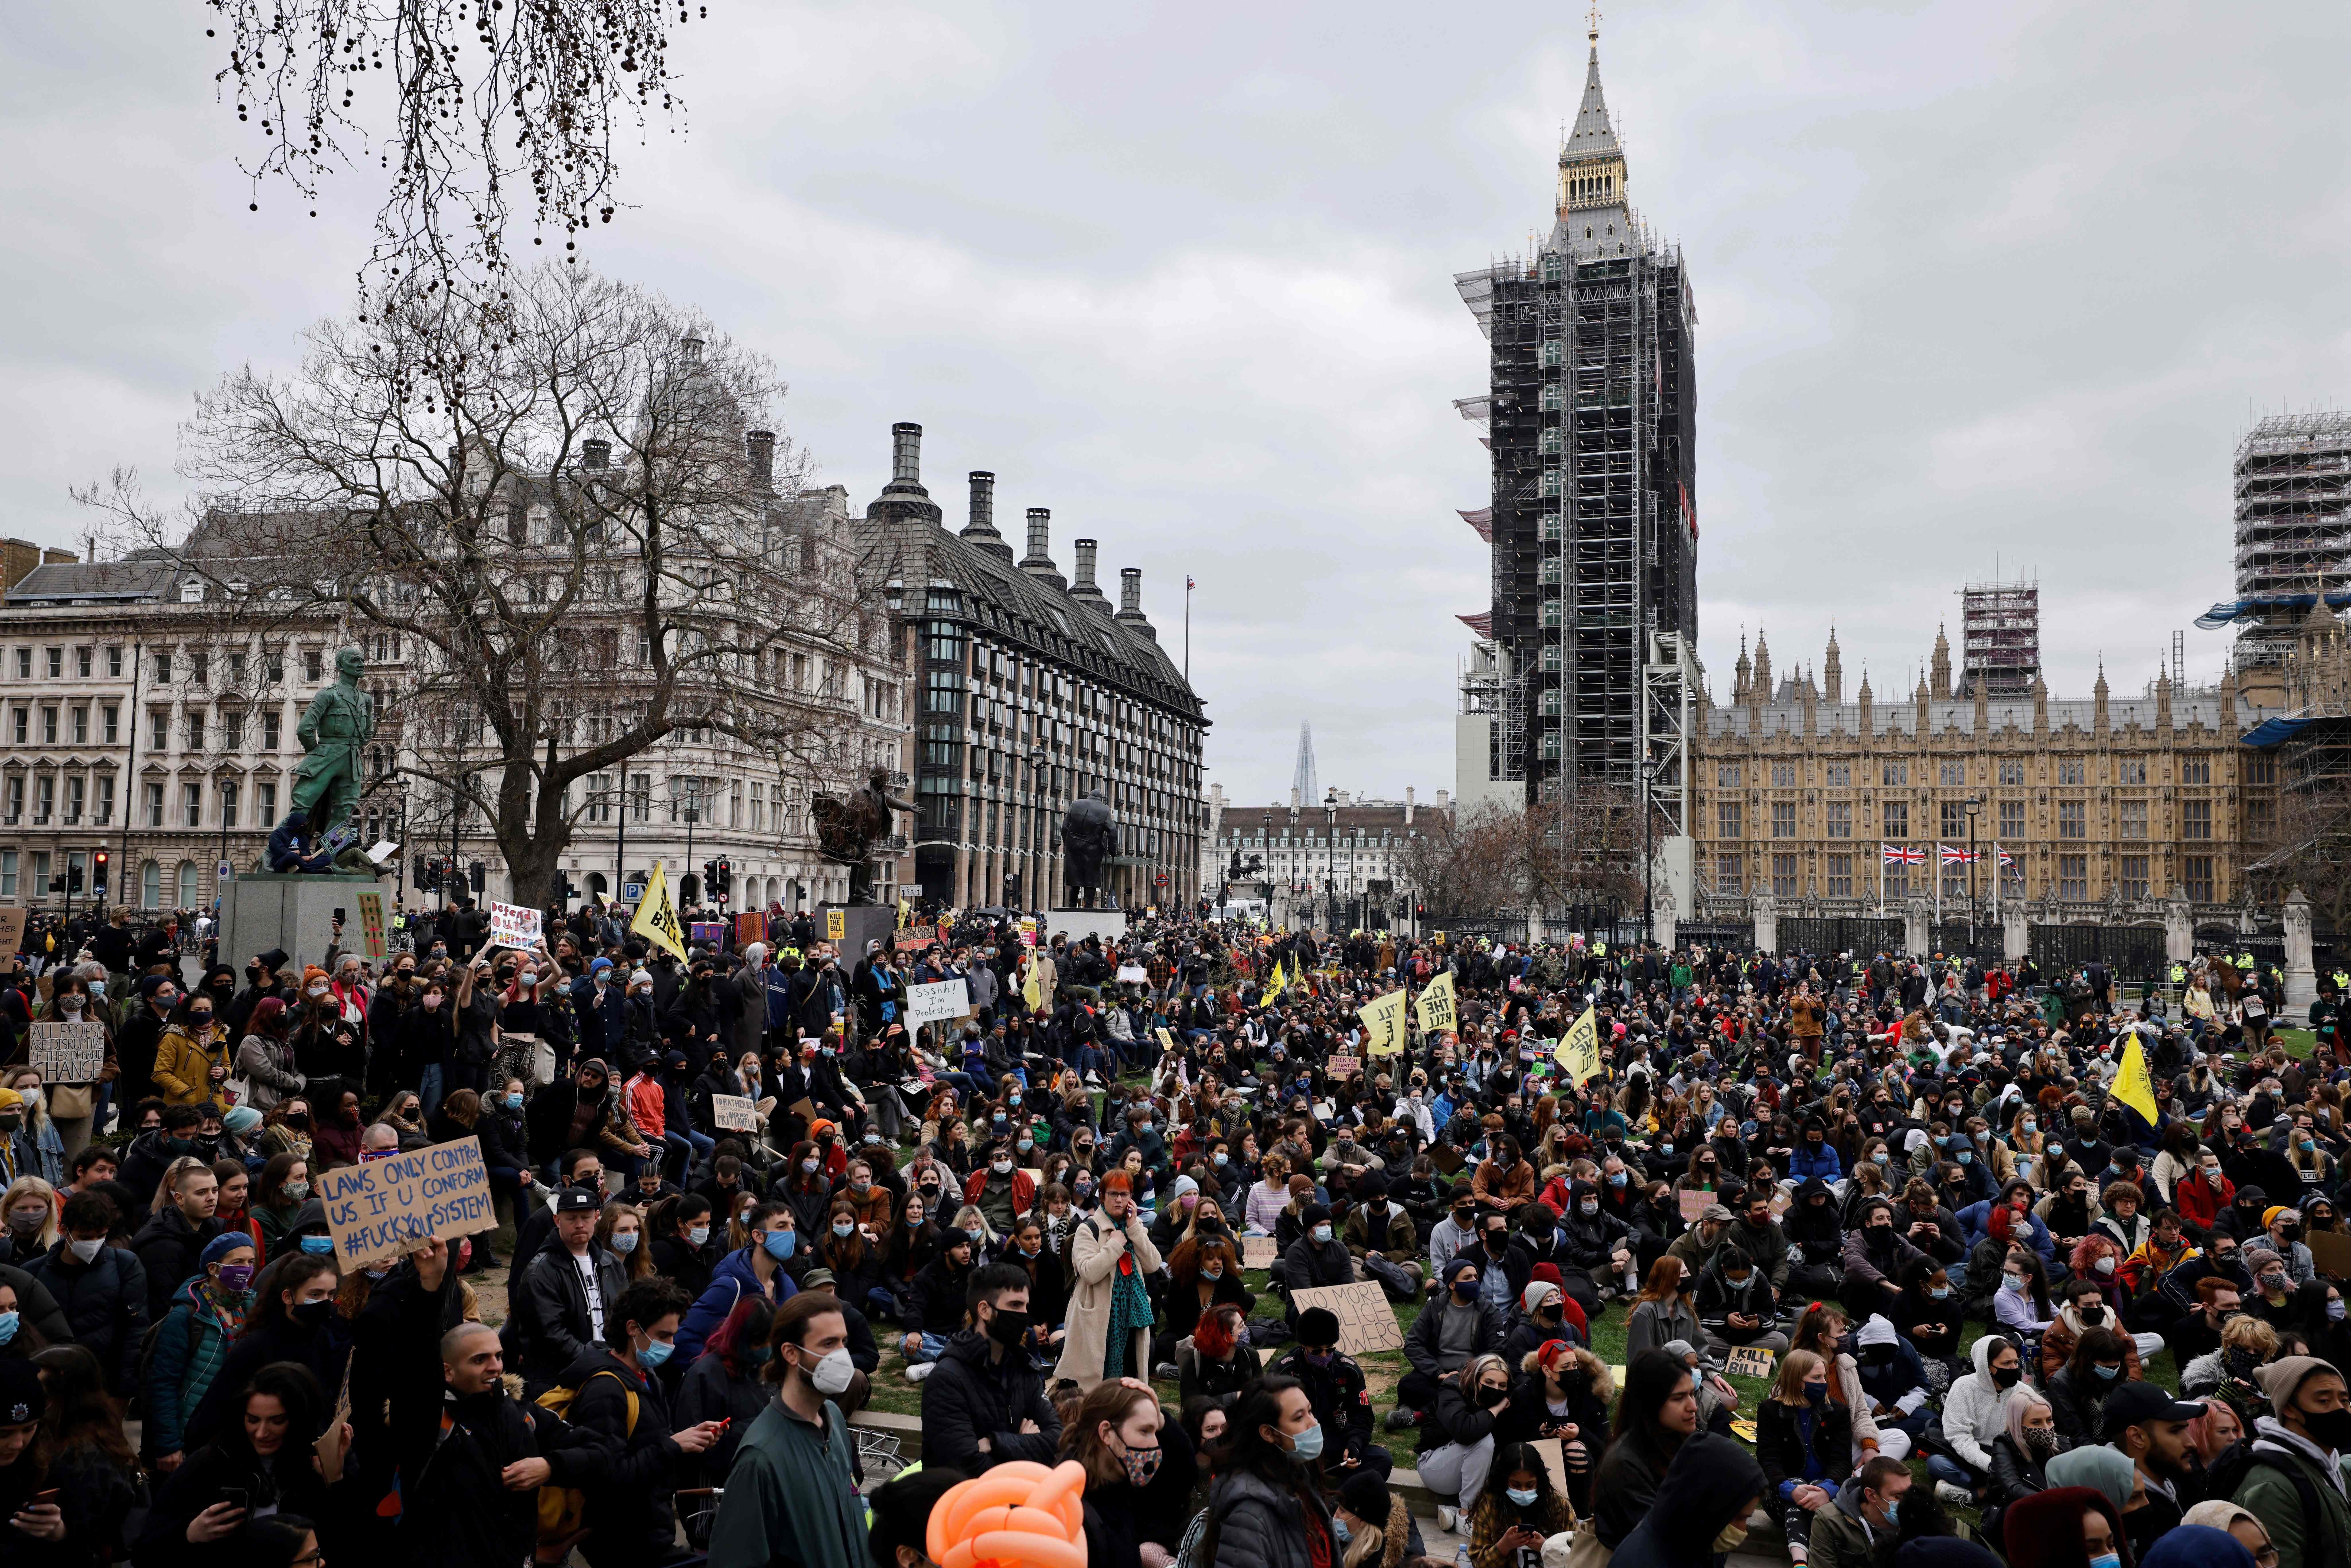 The protest in London on April 3.